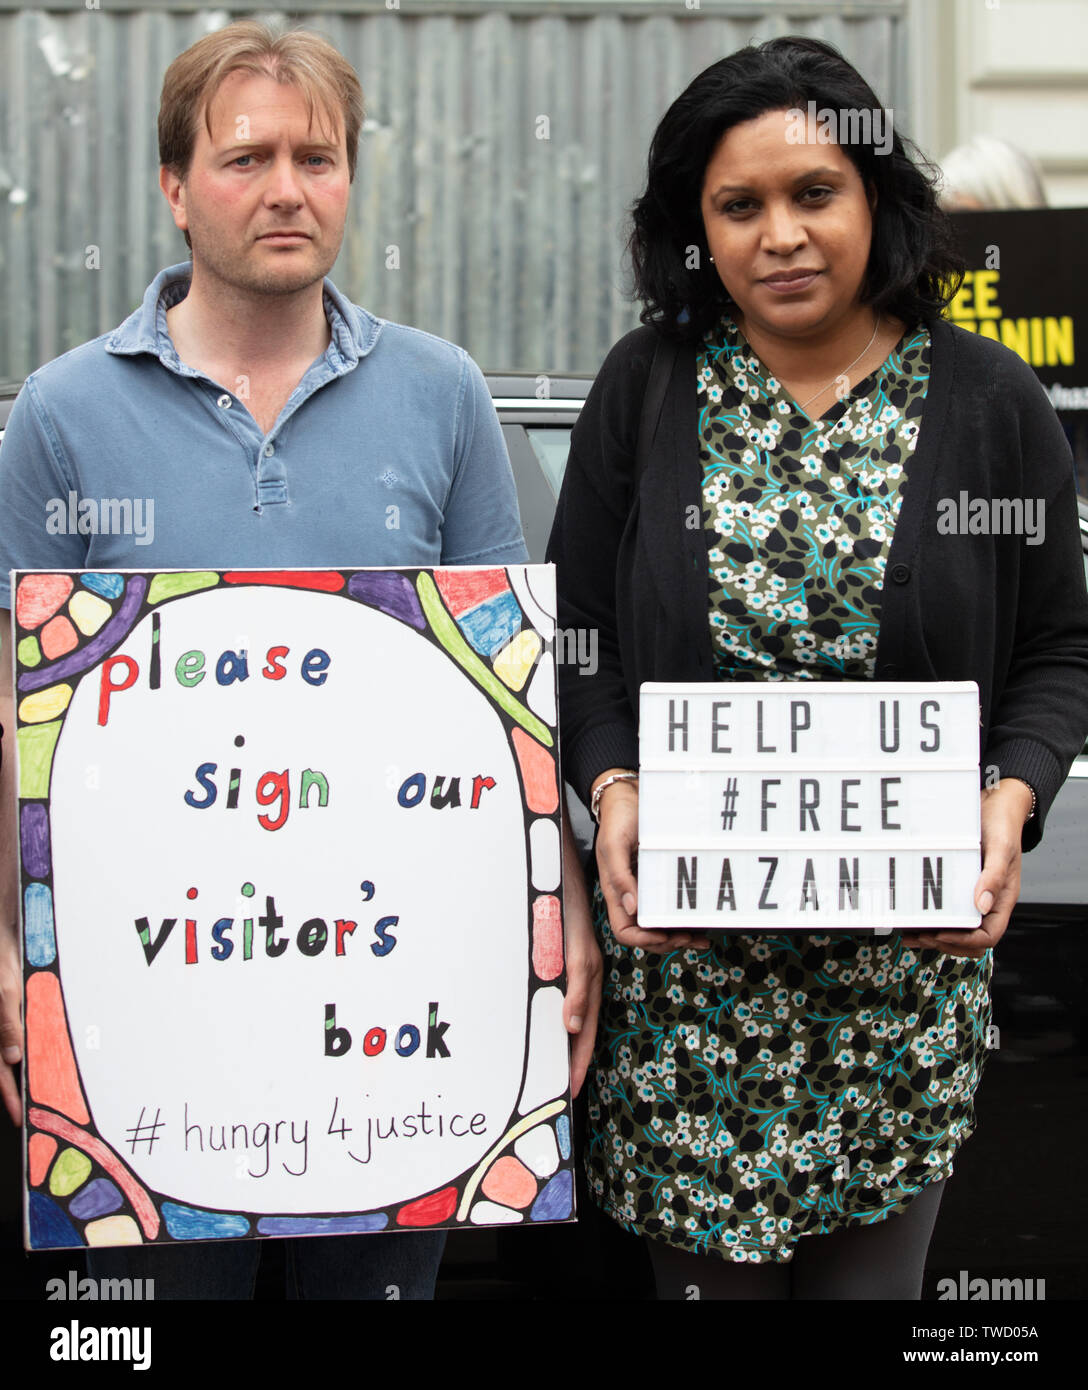 London, UK. 19th June 2019. Janet Daby, British labour party politician and Member of Parliament of Lewisham East and Richard Ratcliffe who is on hunger strike in front of the Iranian embassy in London in protest of the detention of his wife Nazanin Zaghari in Iran over spying allegations. Credit: Joe Kuis / Alamy Stock Photo